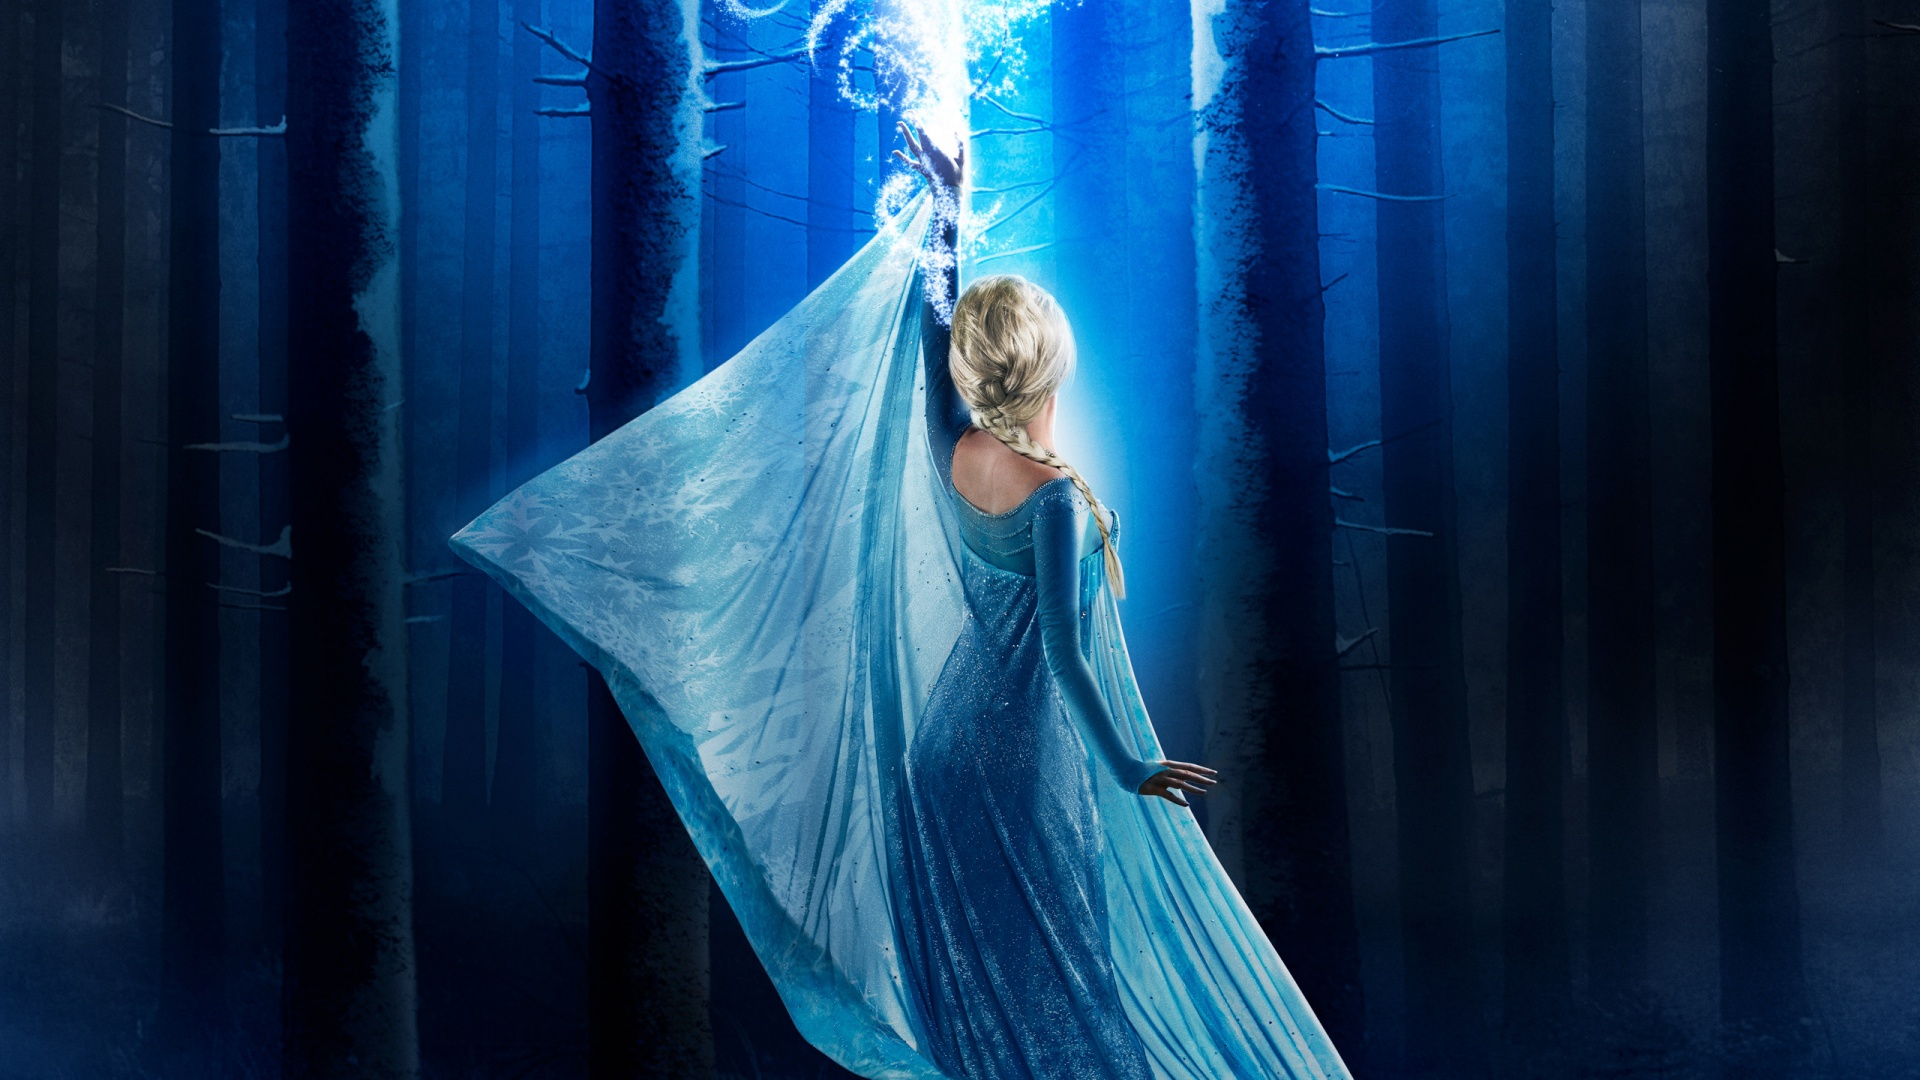 HD Wallpaper Once Upon A Time Back Elsa Of